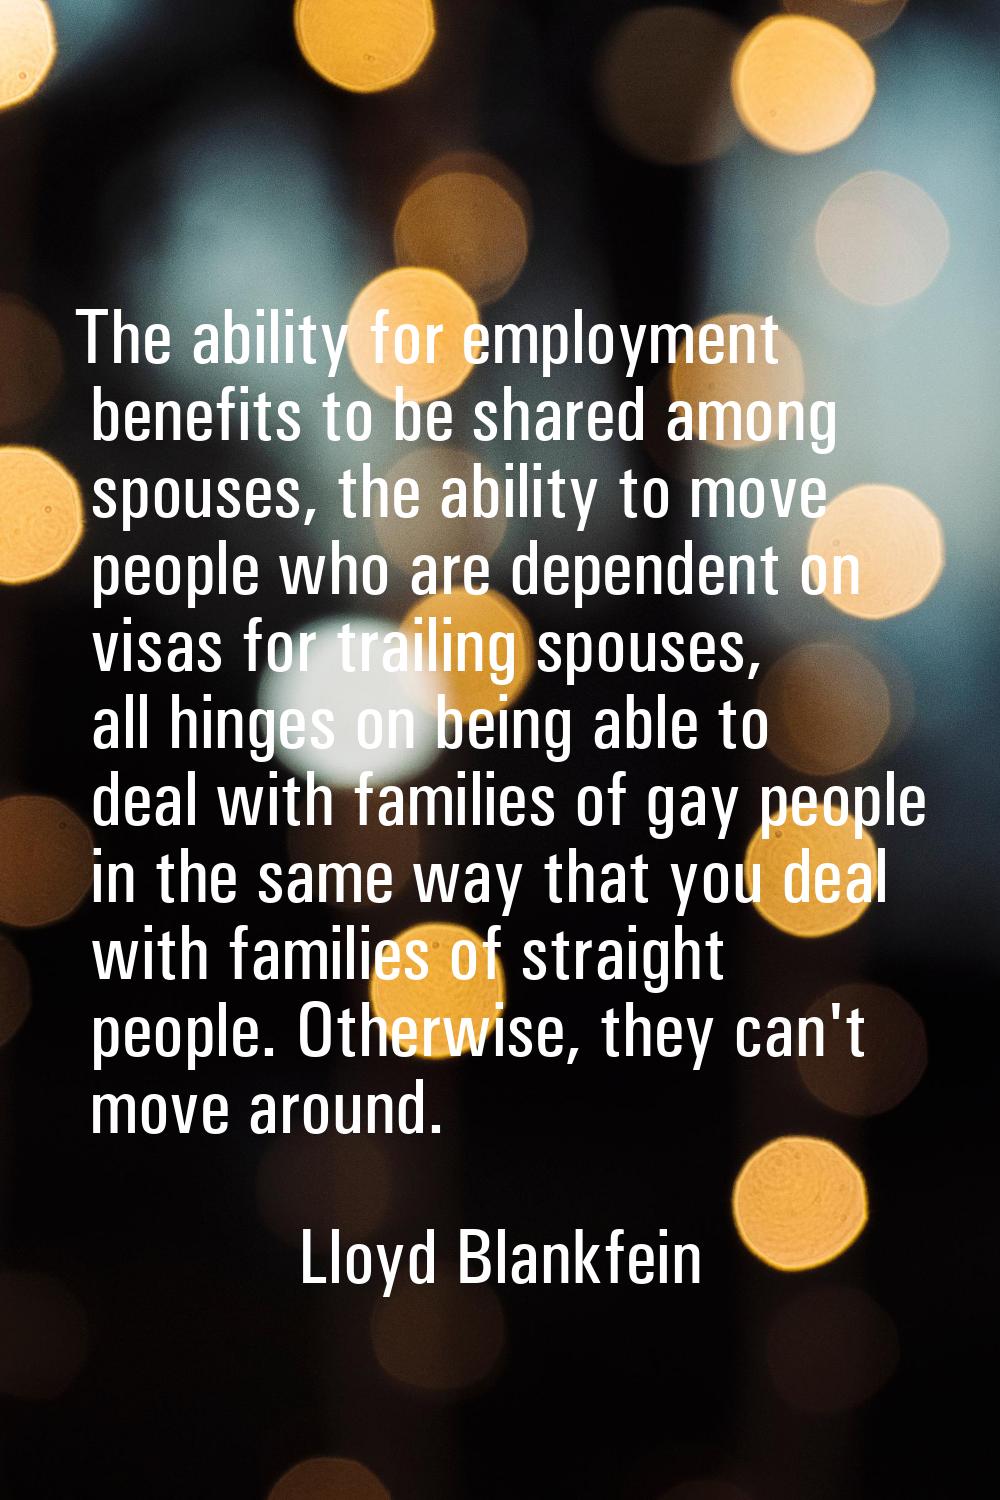 The ability for employment benefits to be shared among spouses, the ability to move people who are 